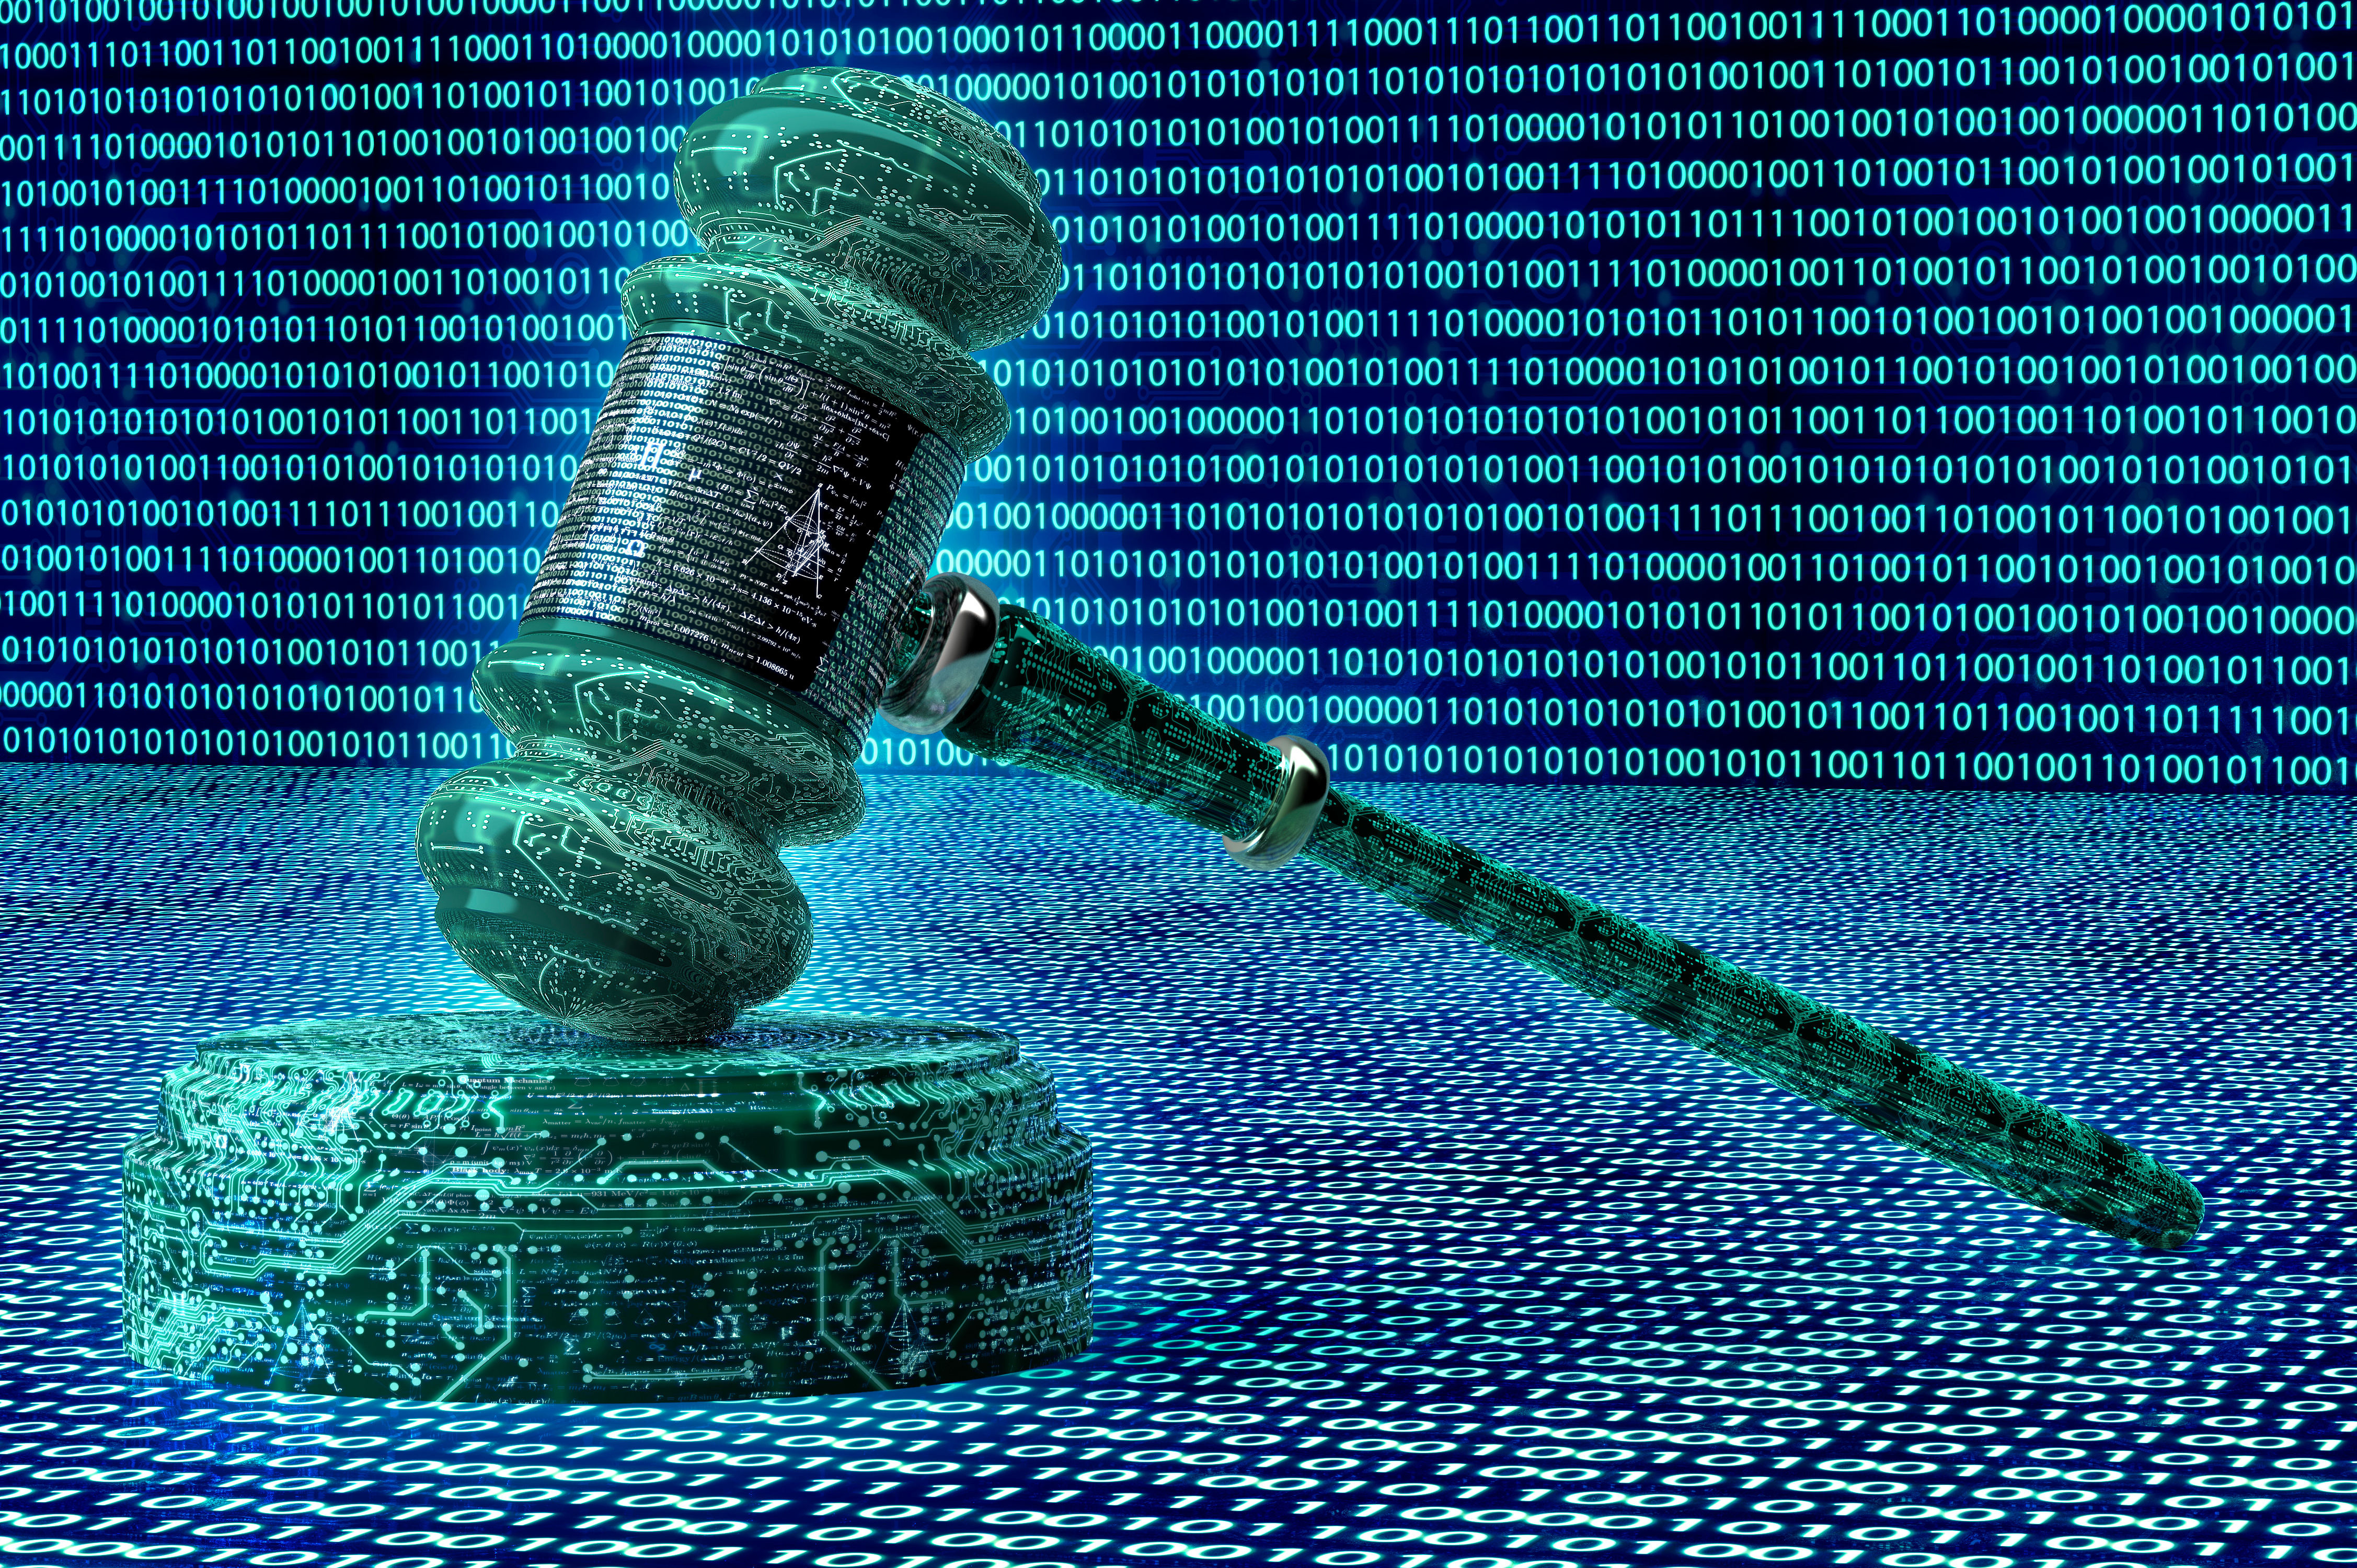 Law Firms & Legal Departments Singled Out for Cyberattacks